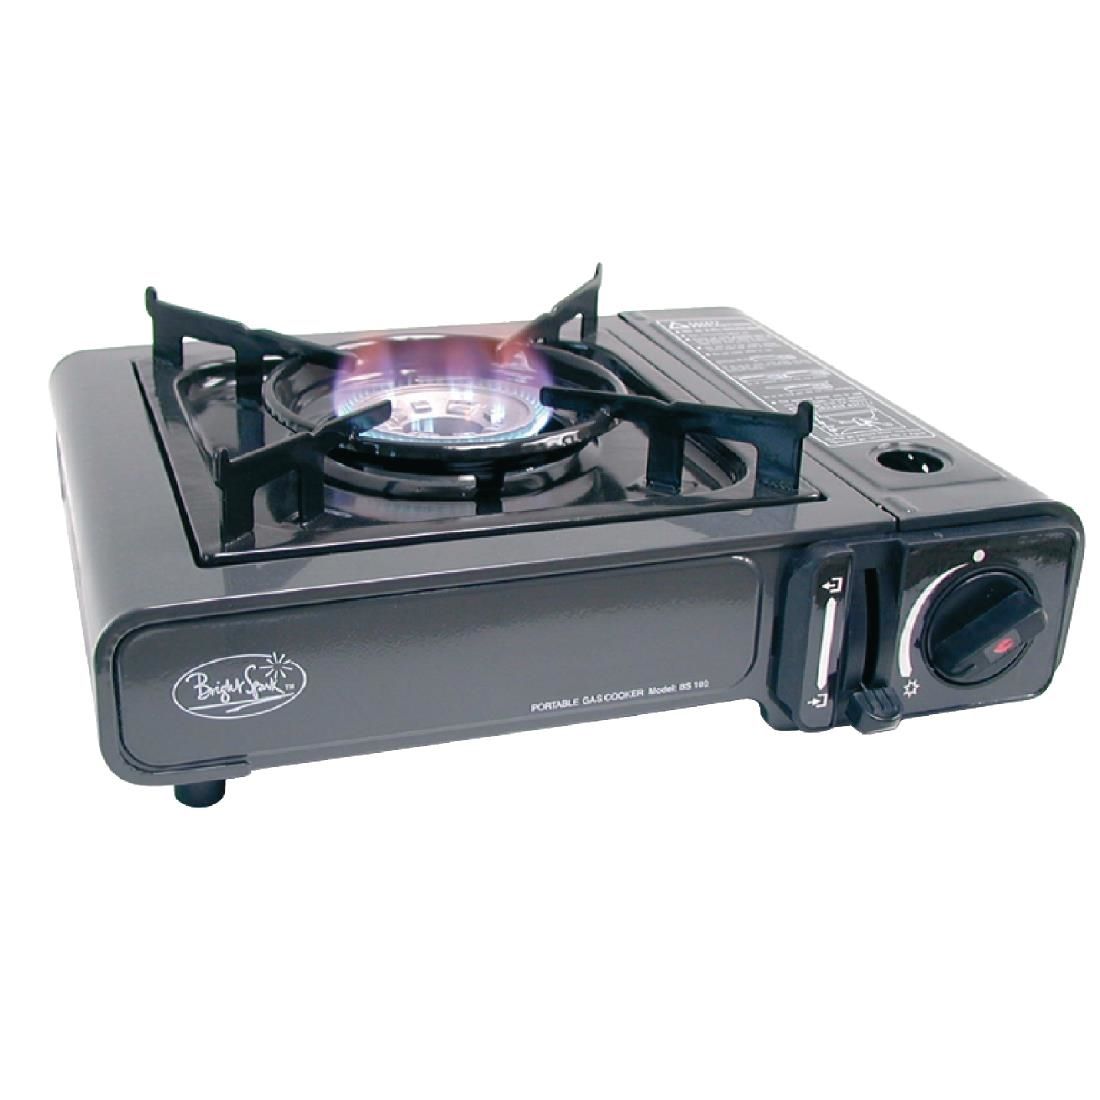 Bright Spark Portable Gas Cartridge Stove BS100 JD Catering Equipment Solutions Ltd